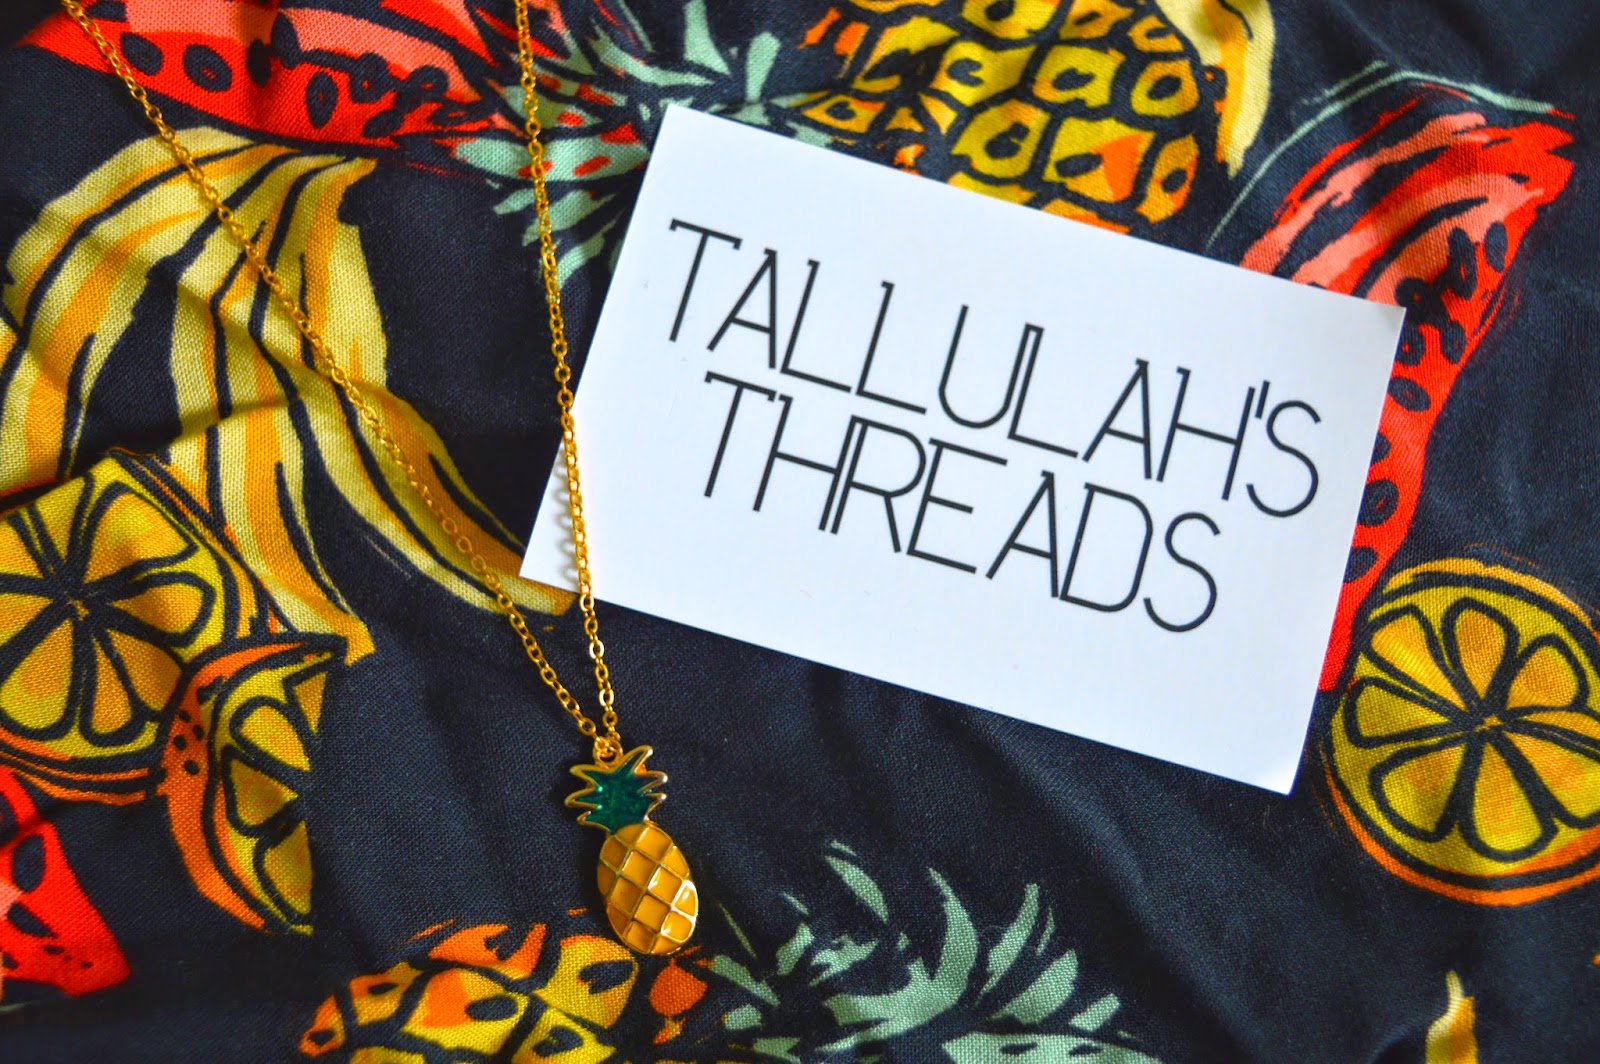 Jewellery Review: Tallulah's Threads Necklace